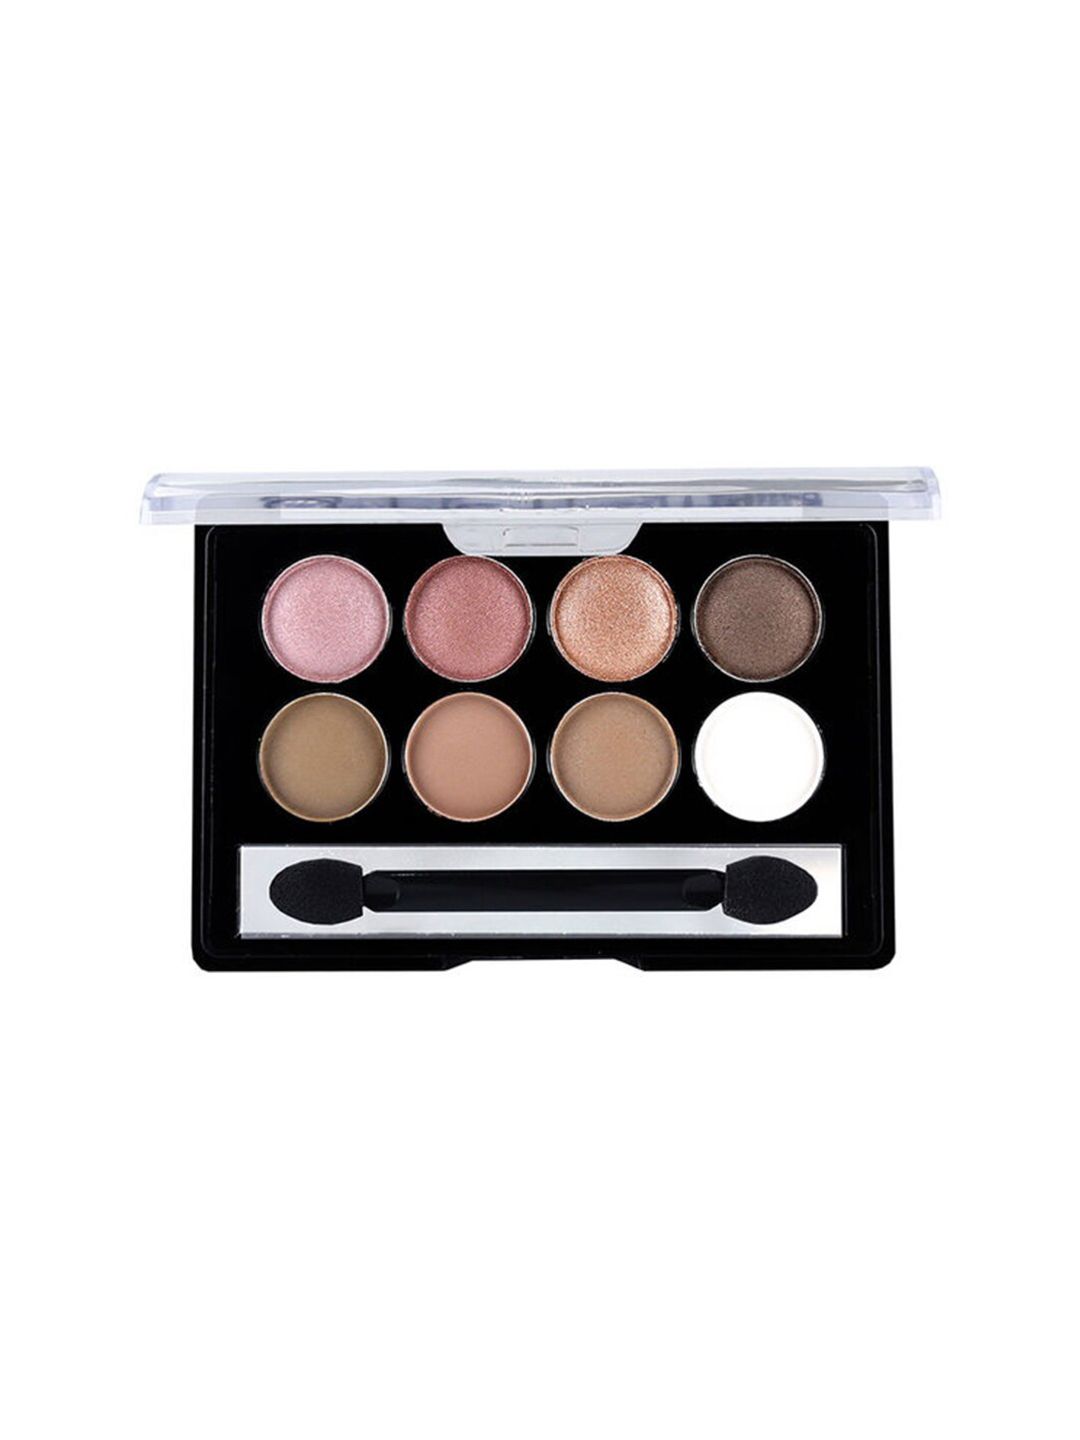 Sivanna Colors Make Up Studio Glamorous Collection Eye Shadow Palette - HF553 06 Price in India